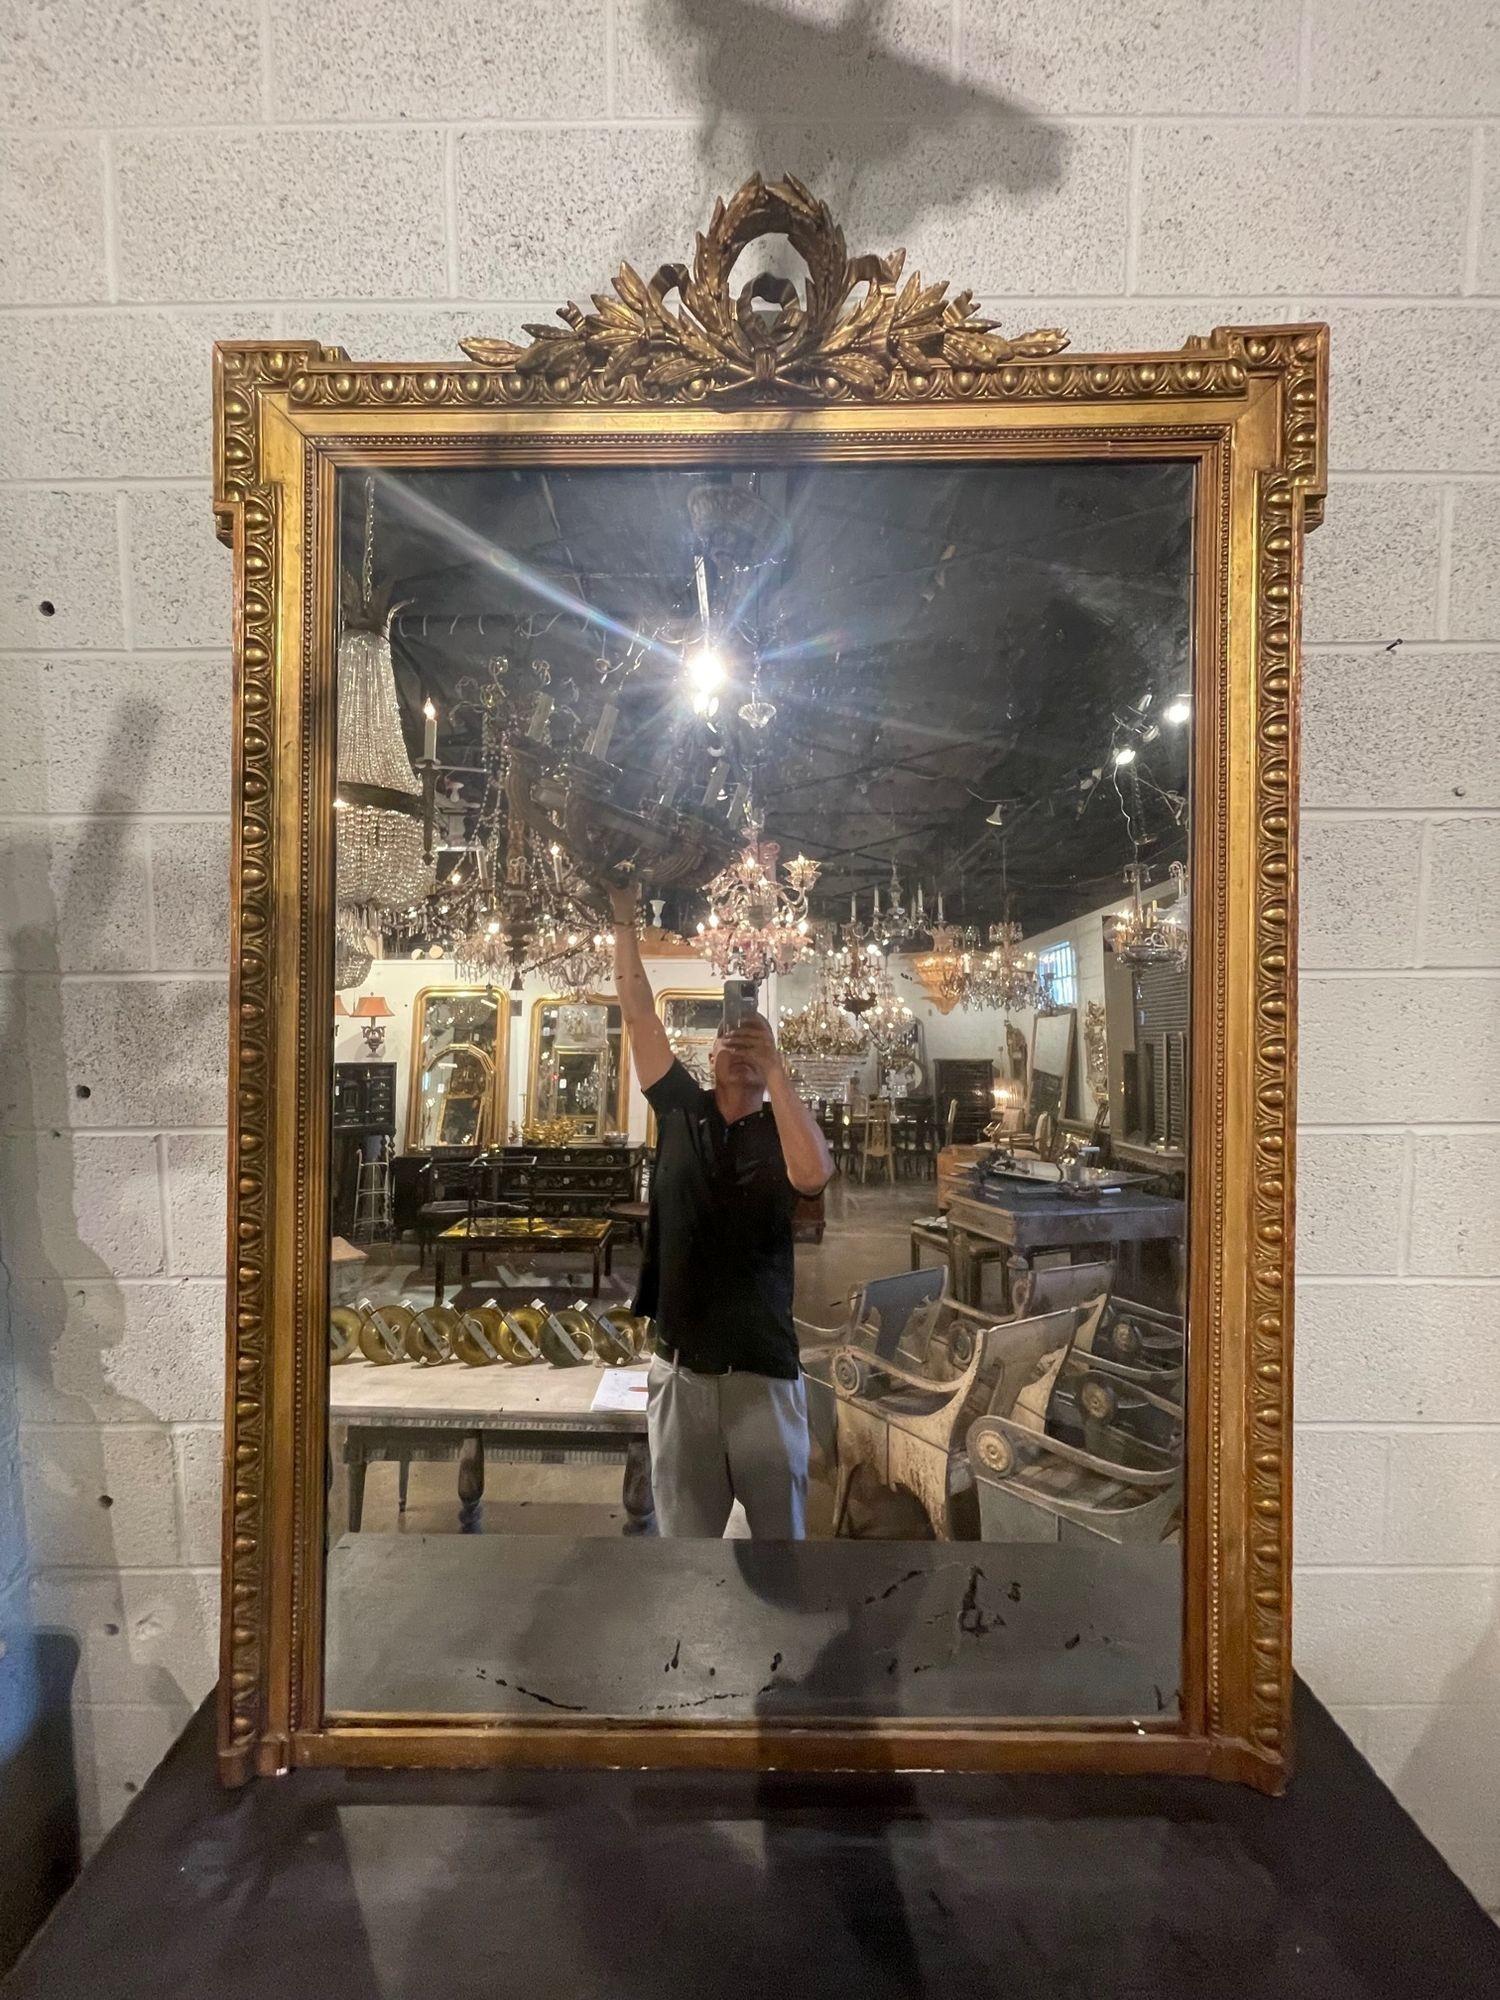 Very fine 19th century French Louis XVI style carved and giltwood mirror. Featuring lovely elaborate carvings including a crest at the top. An exqusite piece for a fine home!